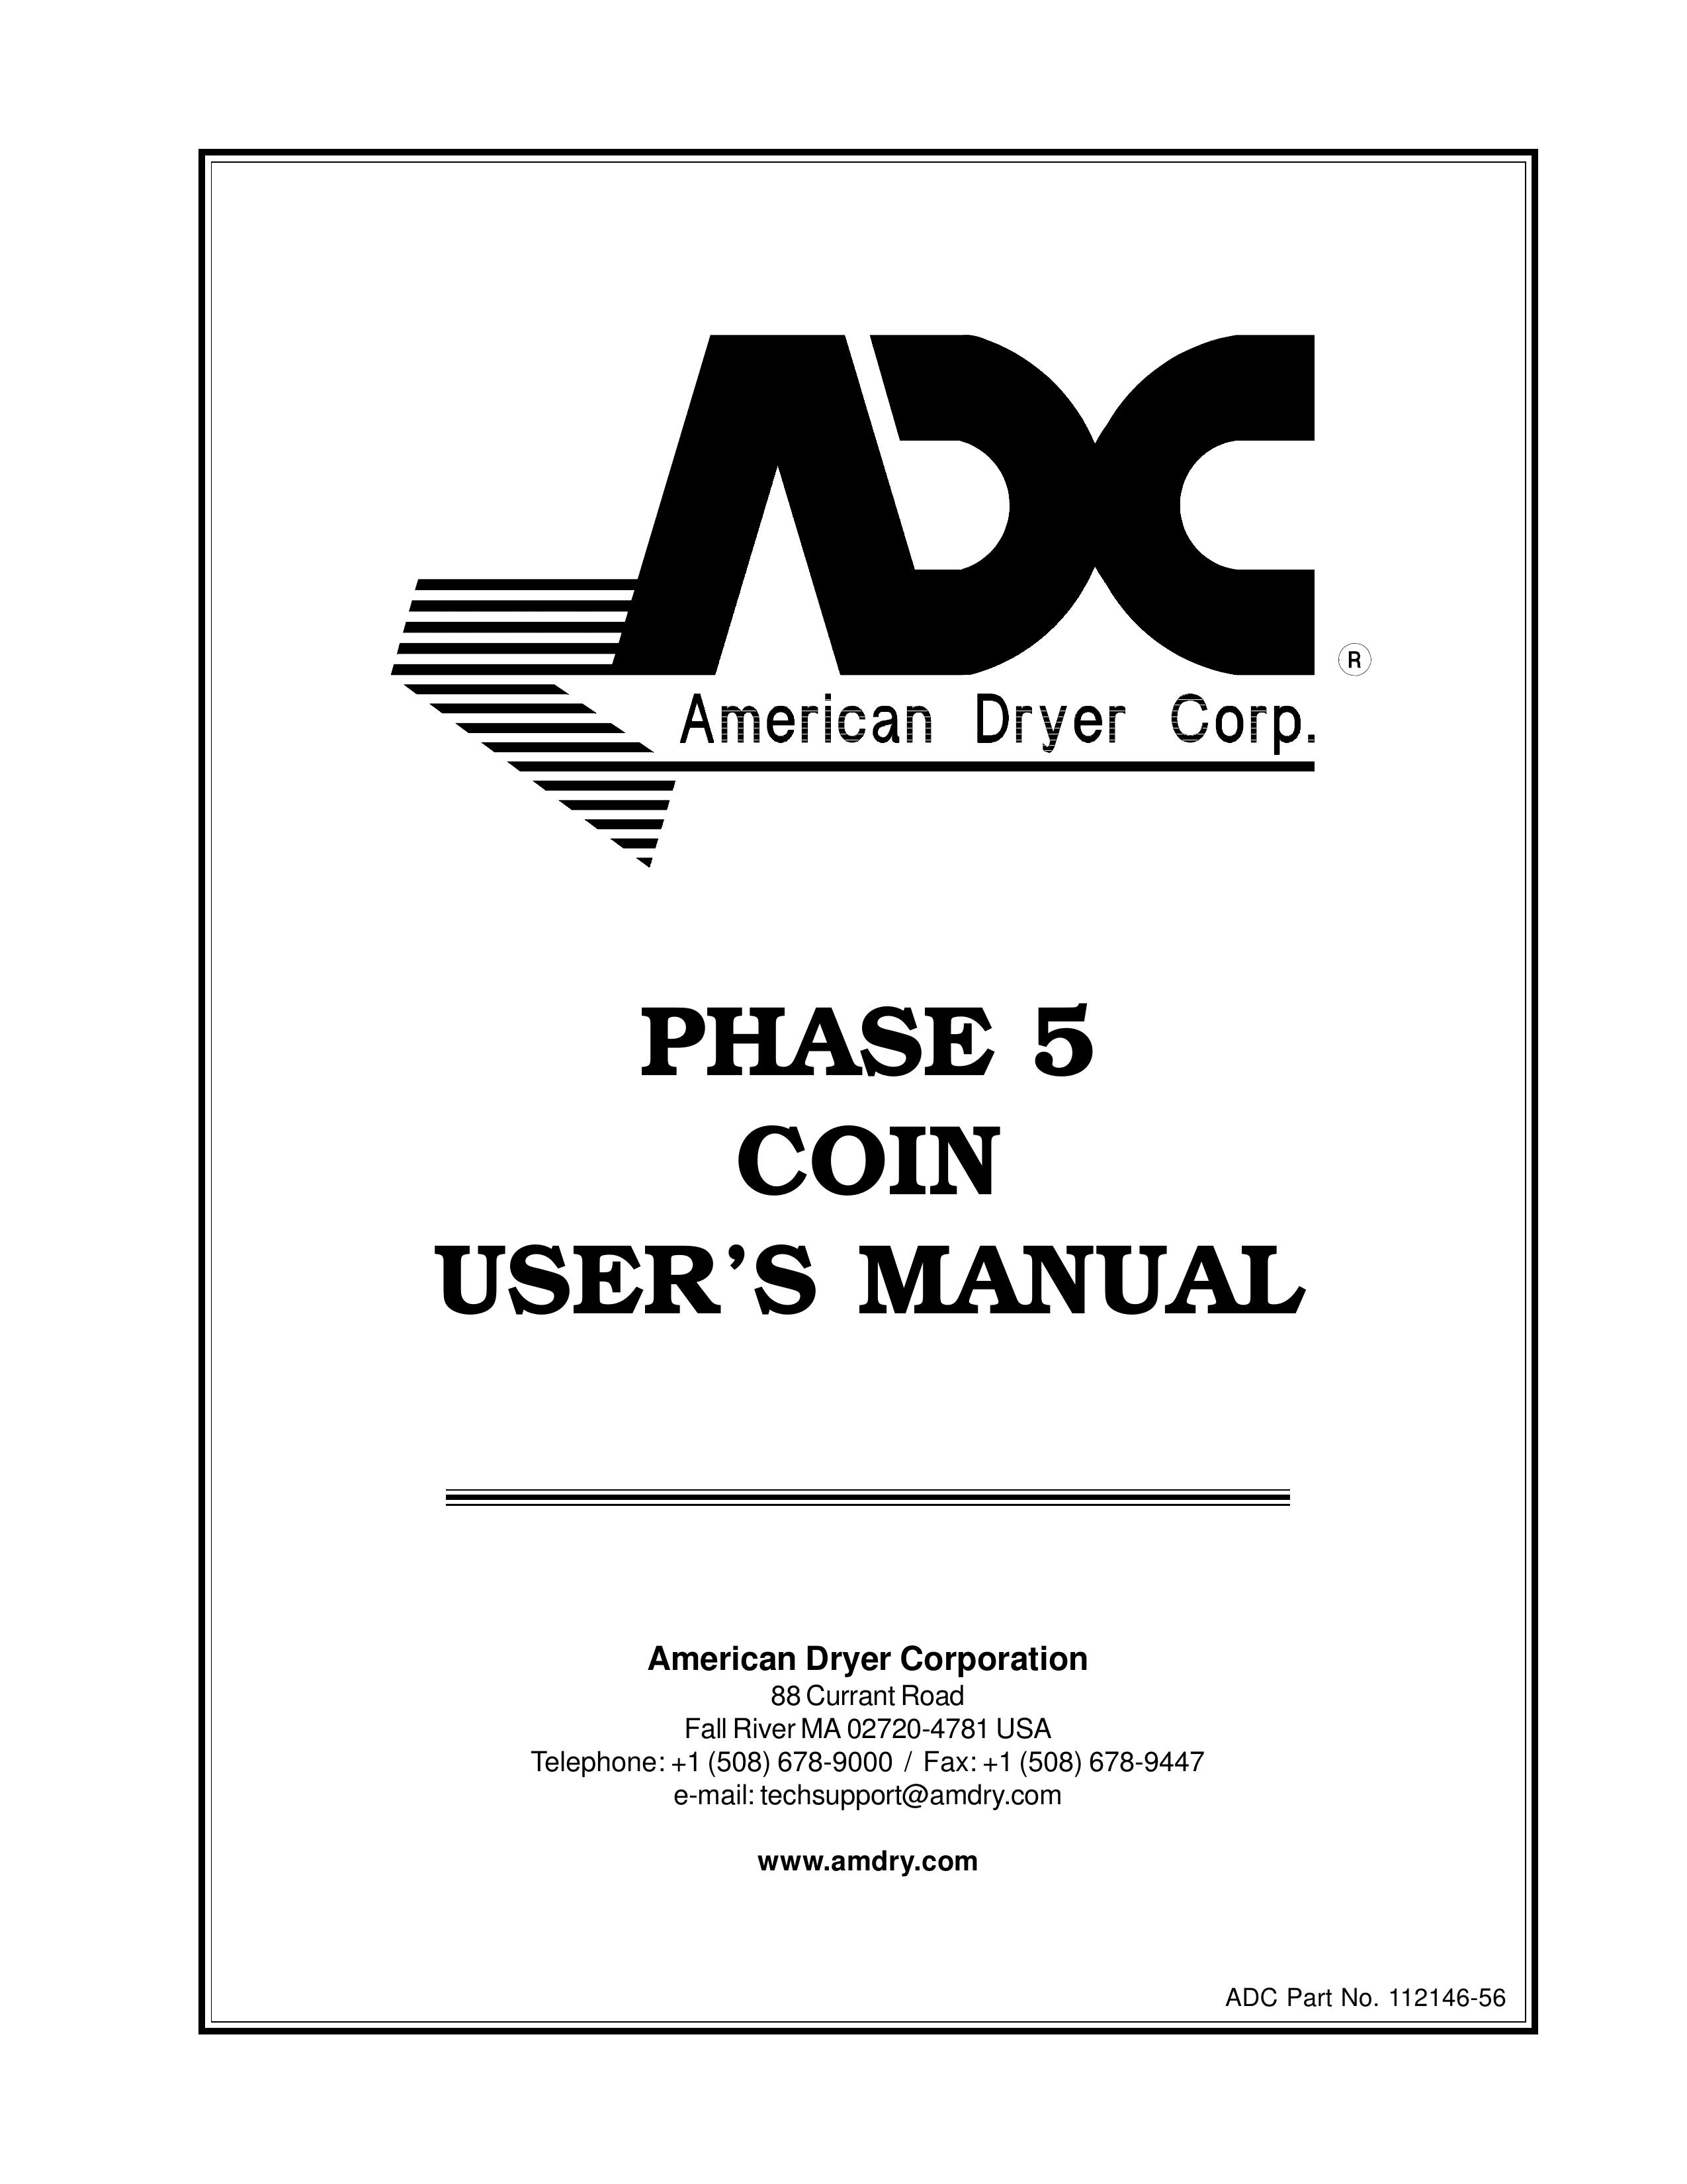 ADC AD-540 Clothes Dryer User Manual